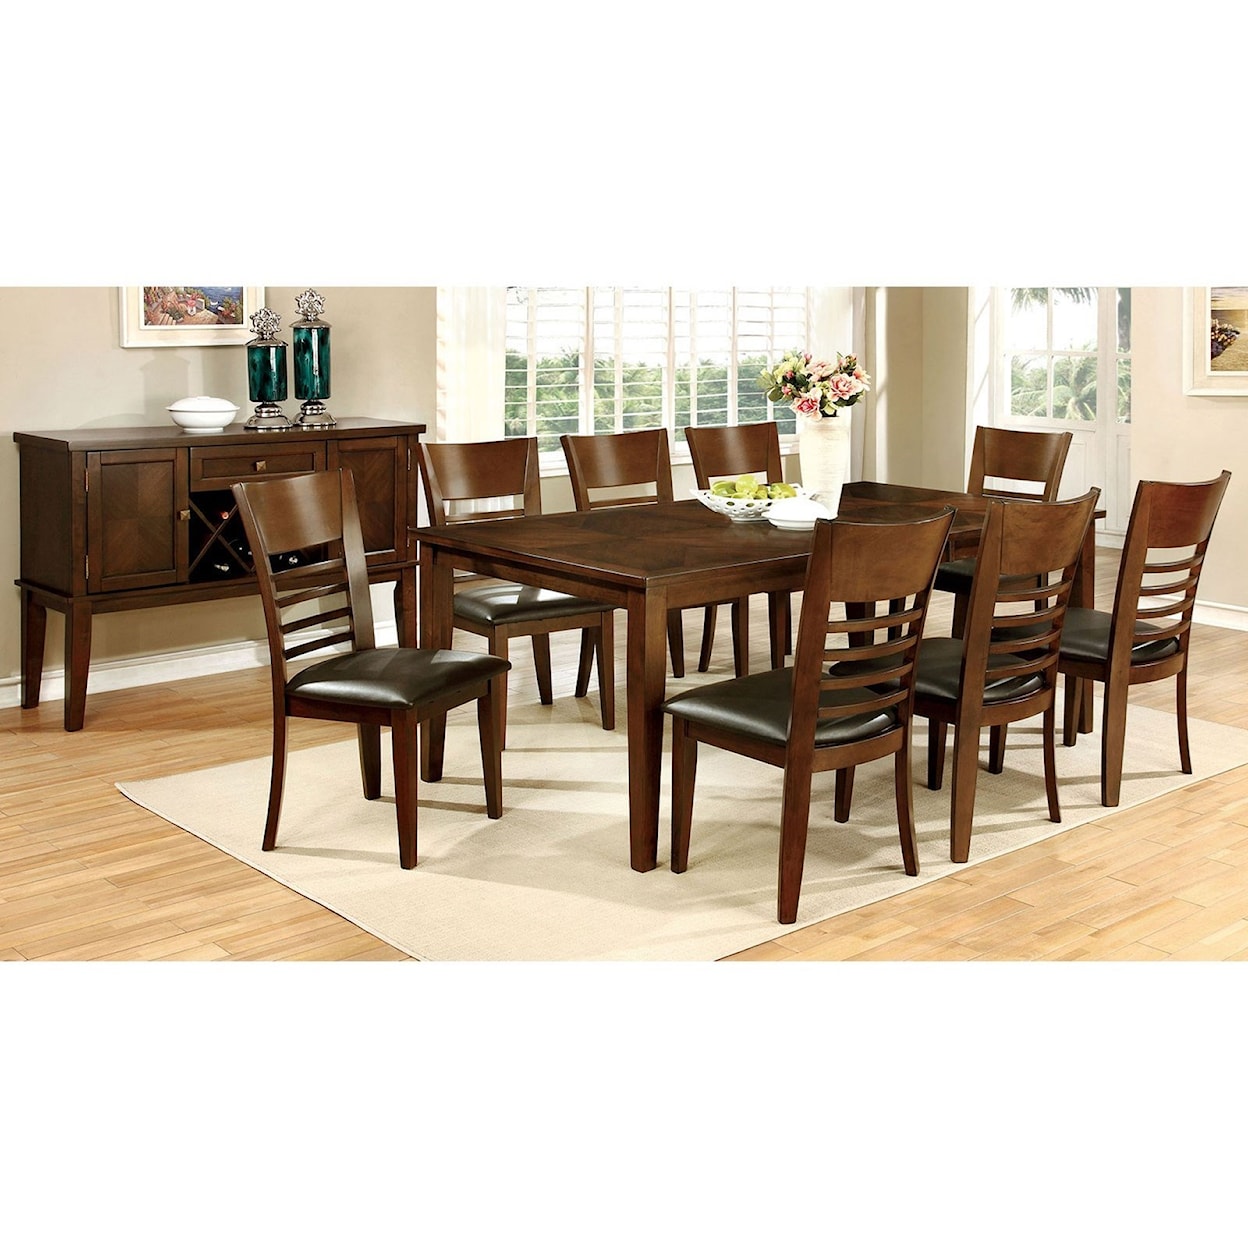 Furniture of America Hillsview Dining Table and Chair Set 